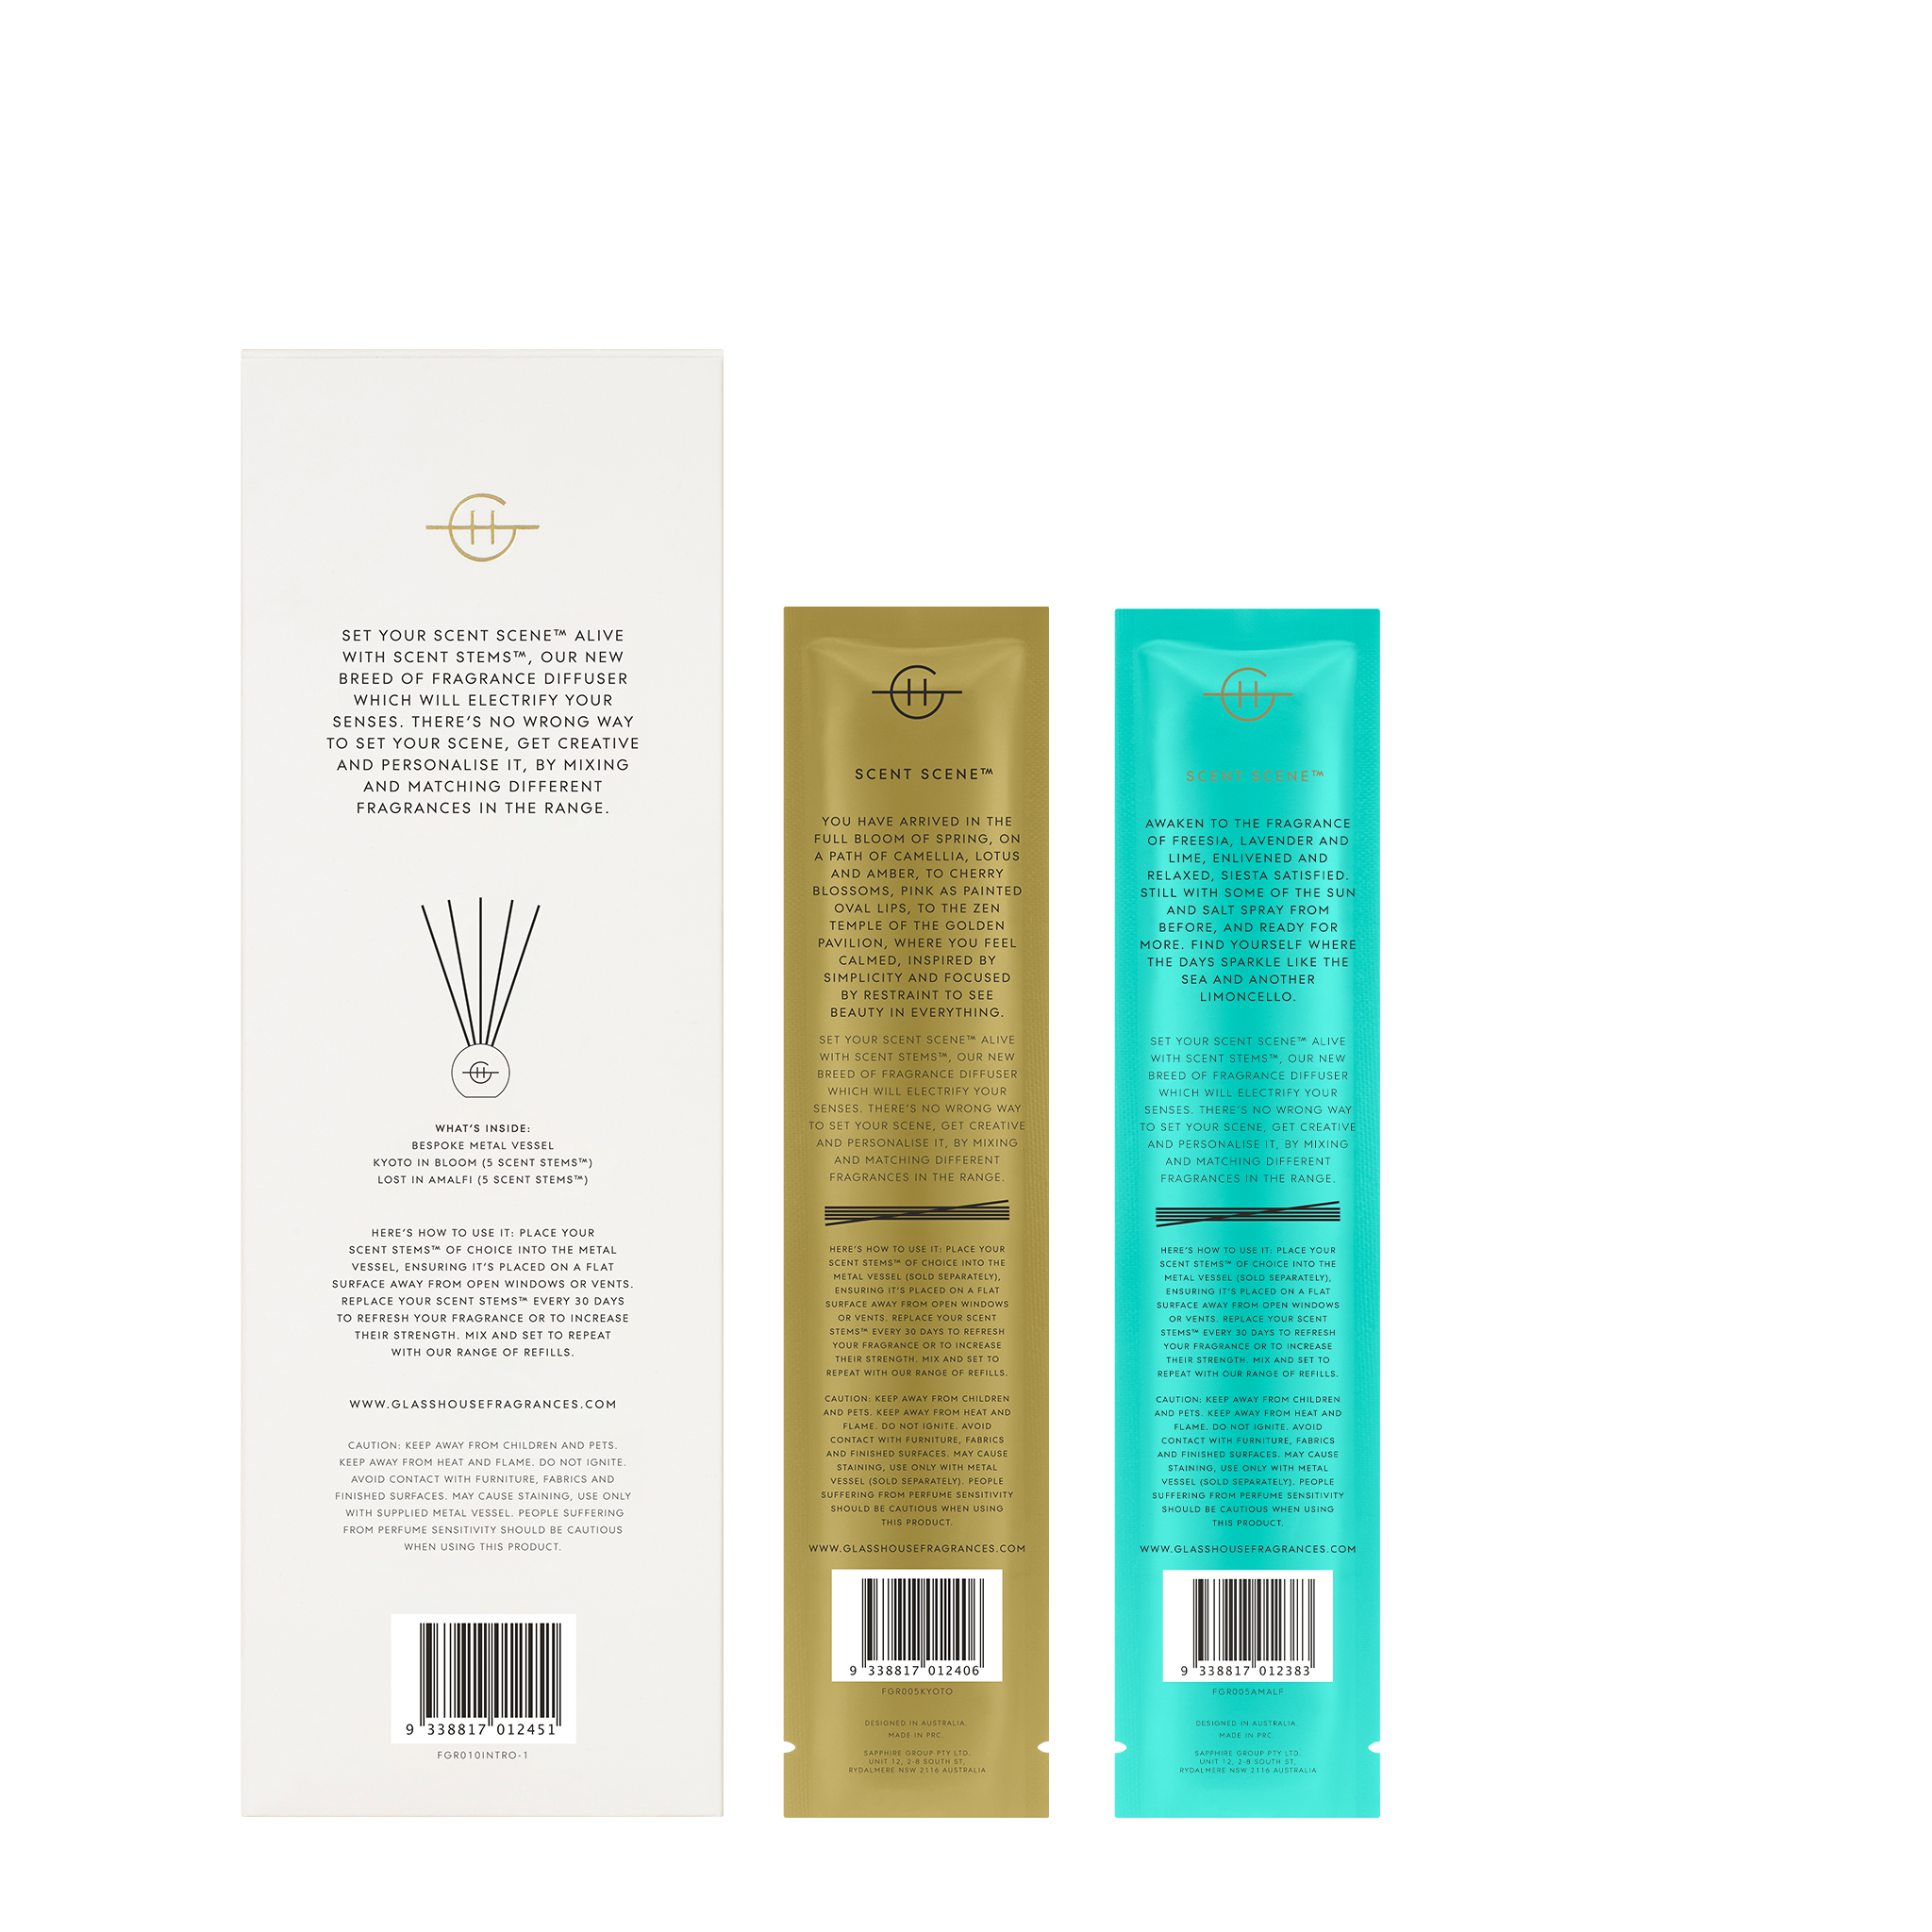 Glasshouse Fragrances Kyoto in Bloom and Lost in Amalfi Scent Scene™ Duo product packaging - back of product